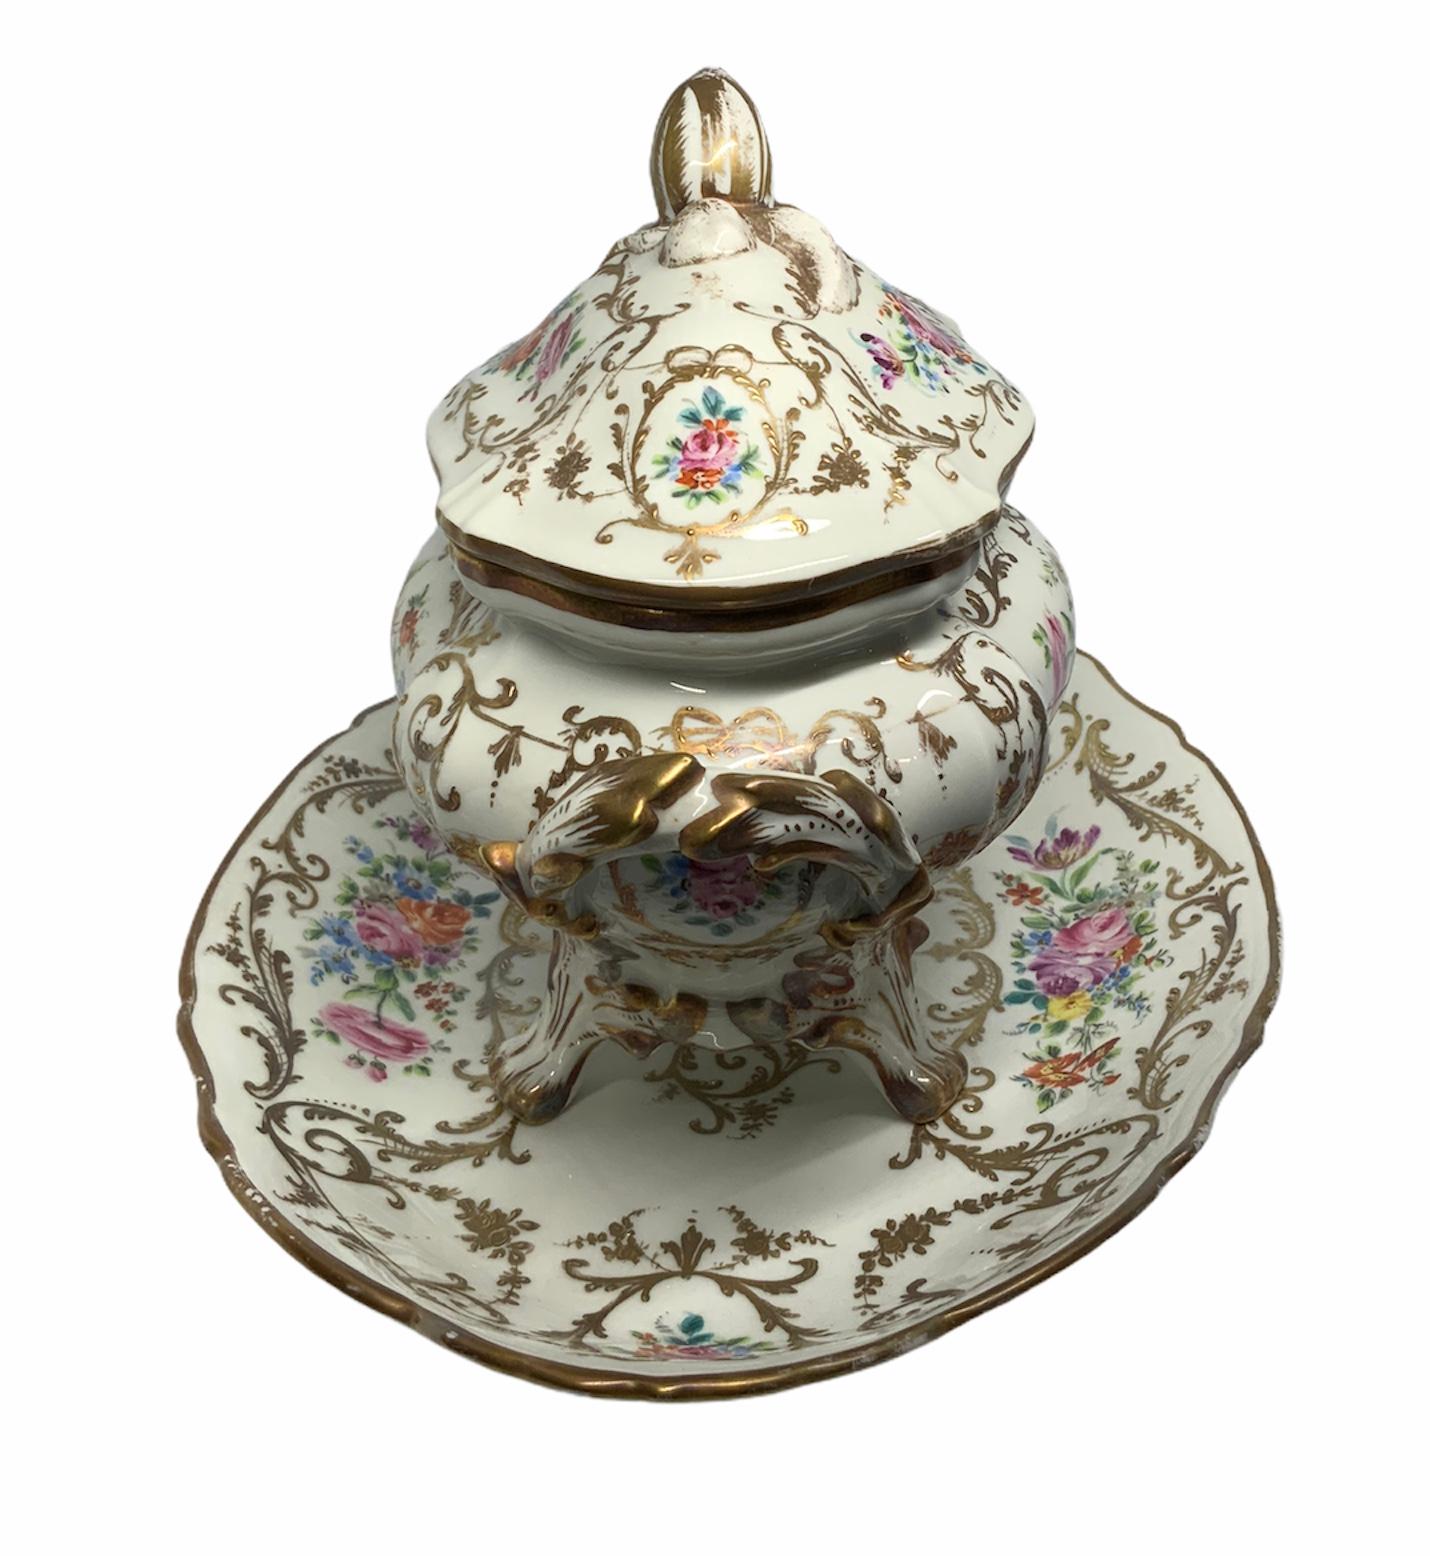 Rococo Camille Le Tallec Handpainted Porcelain Tureen For Sale